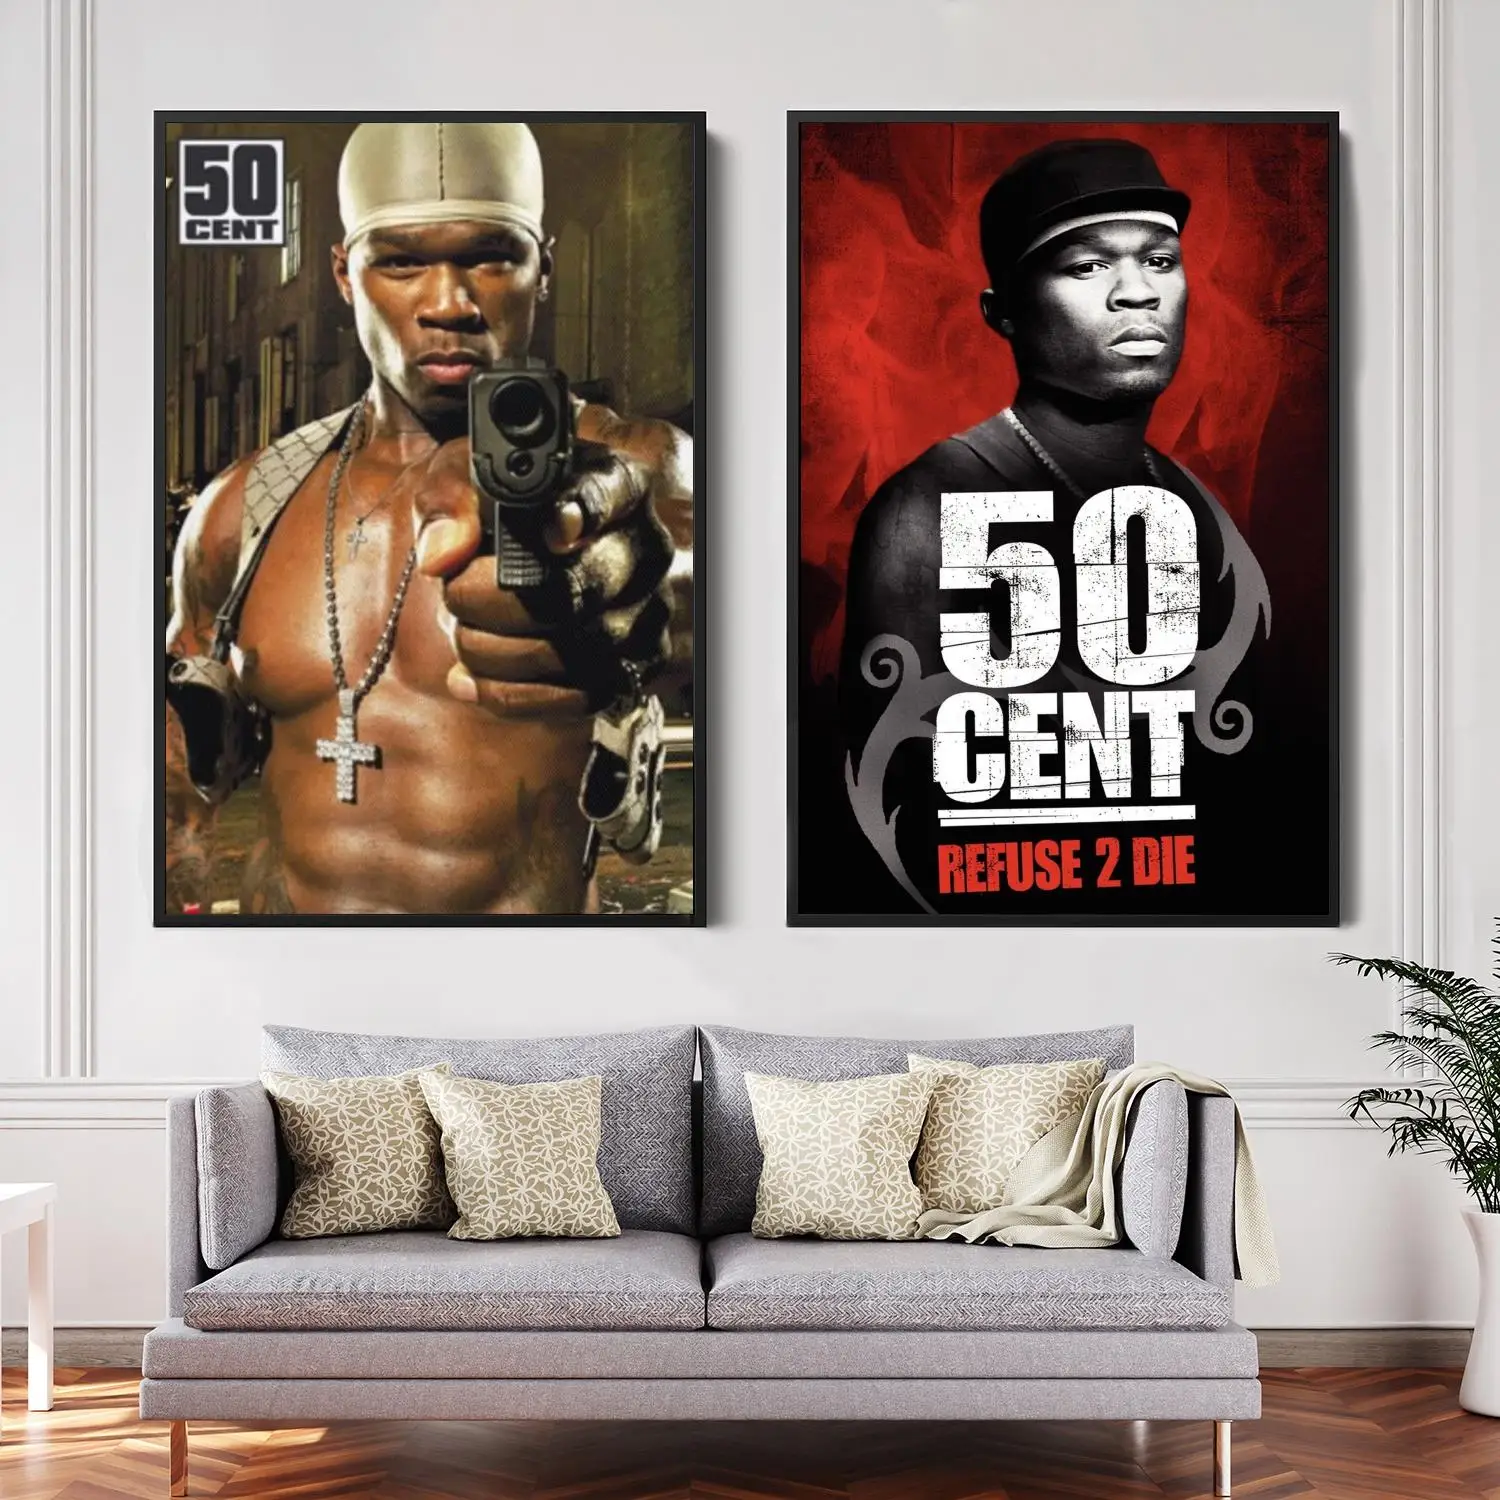 

50 cent Singer Decorative Canvas Posters Room Bar Cafe Decor Gift Print Art Wall Paintings